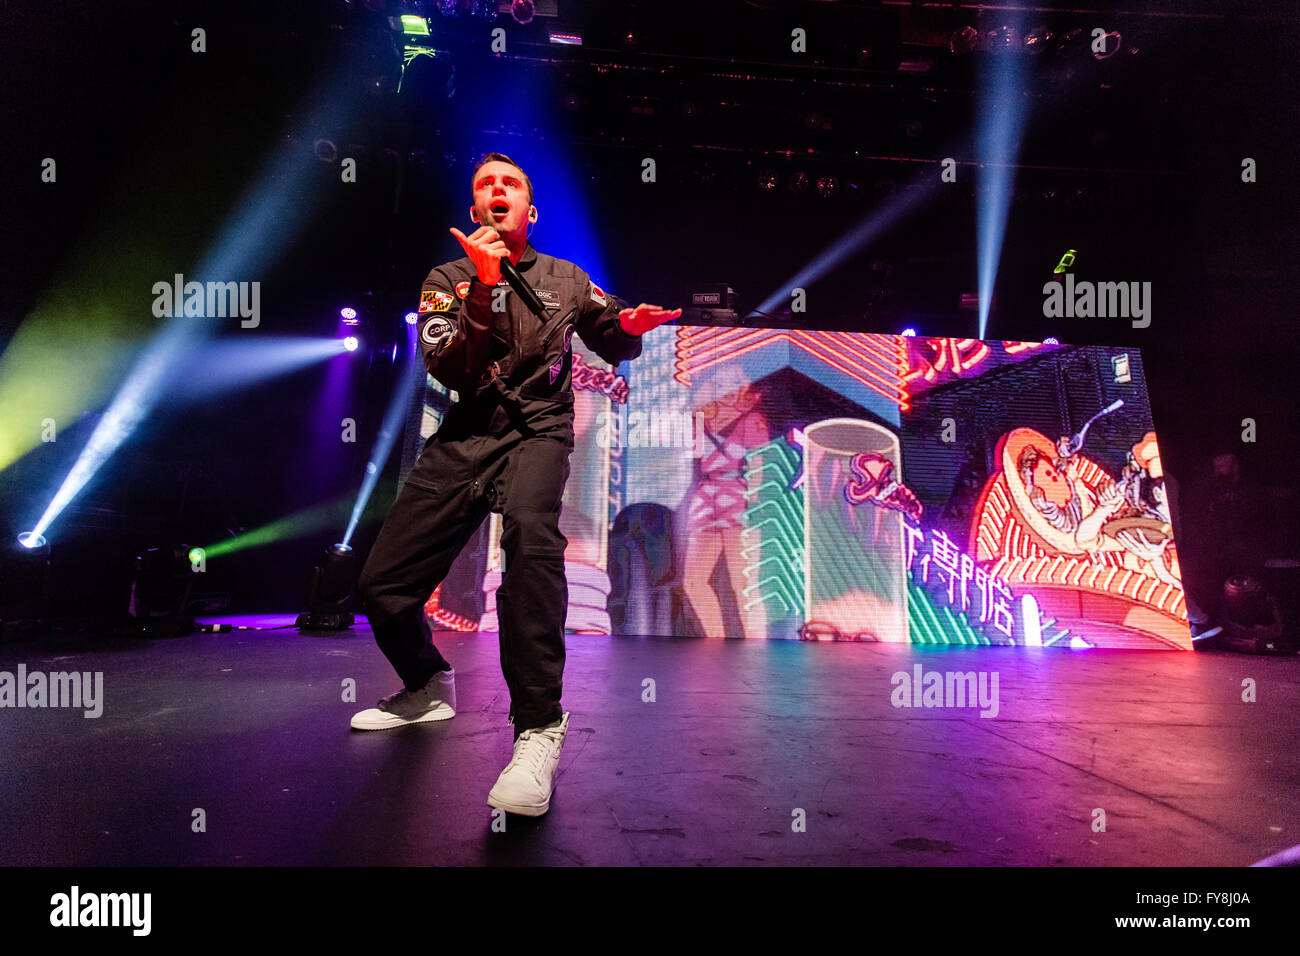 Sir Robert Bryson Hall II aka Logic @ The Vogue Theatre in Vancouver, BC on February 4th 2016 Stock Photo